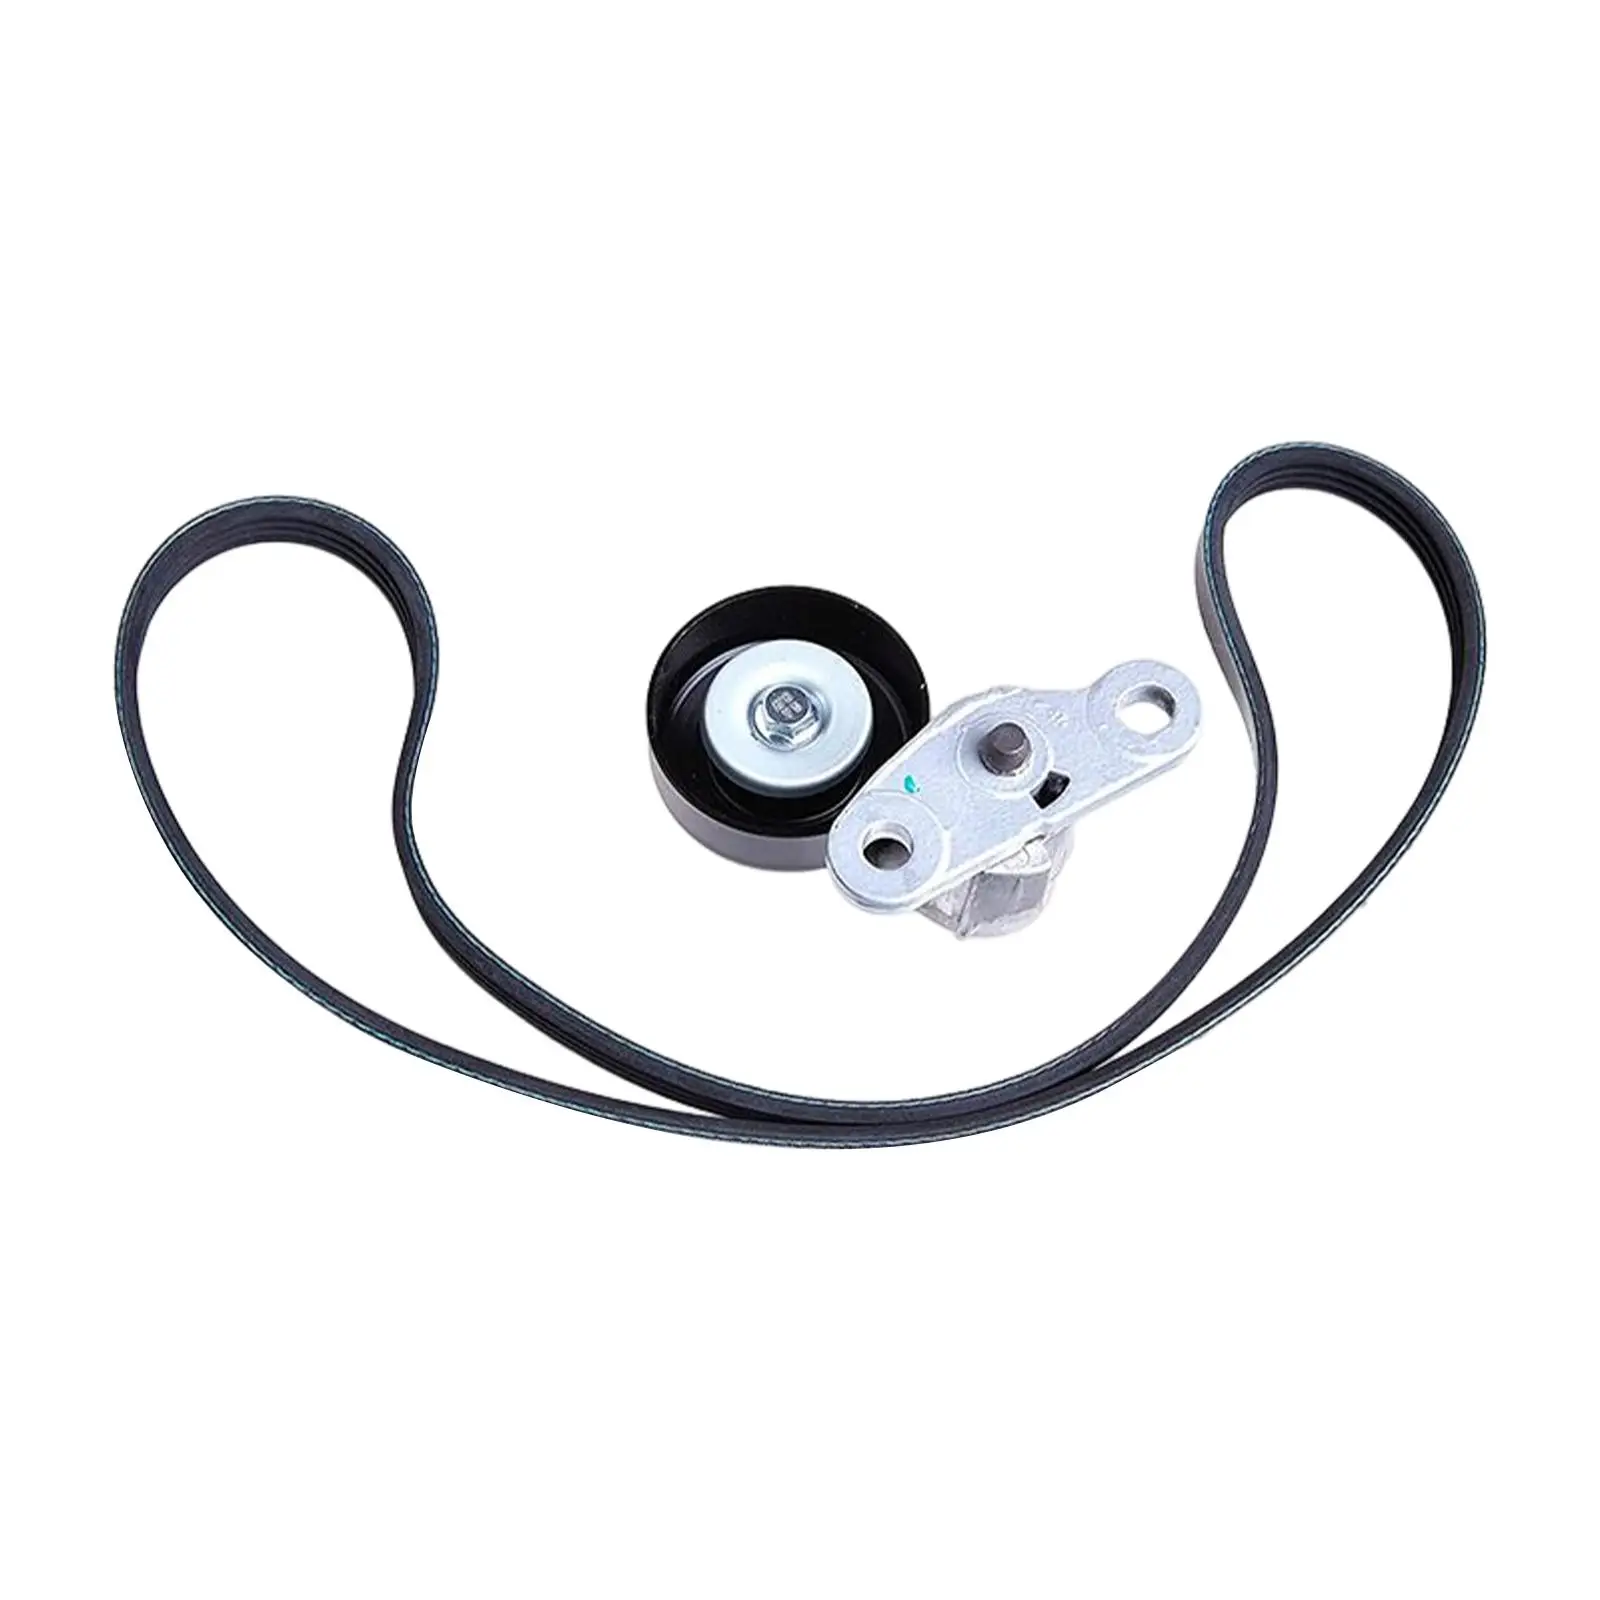 Serpentine Drive Belt Tensioner Kit Ack040378HD for Cadillac Escalade 2002-2008 Professional Easy Installation Accessories